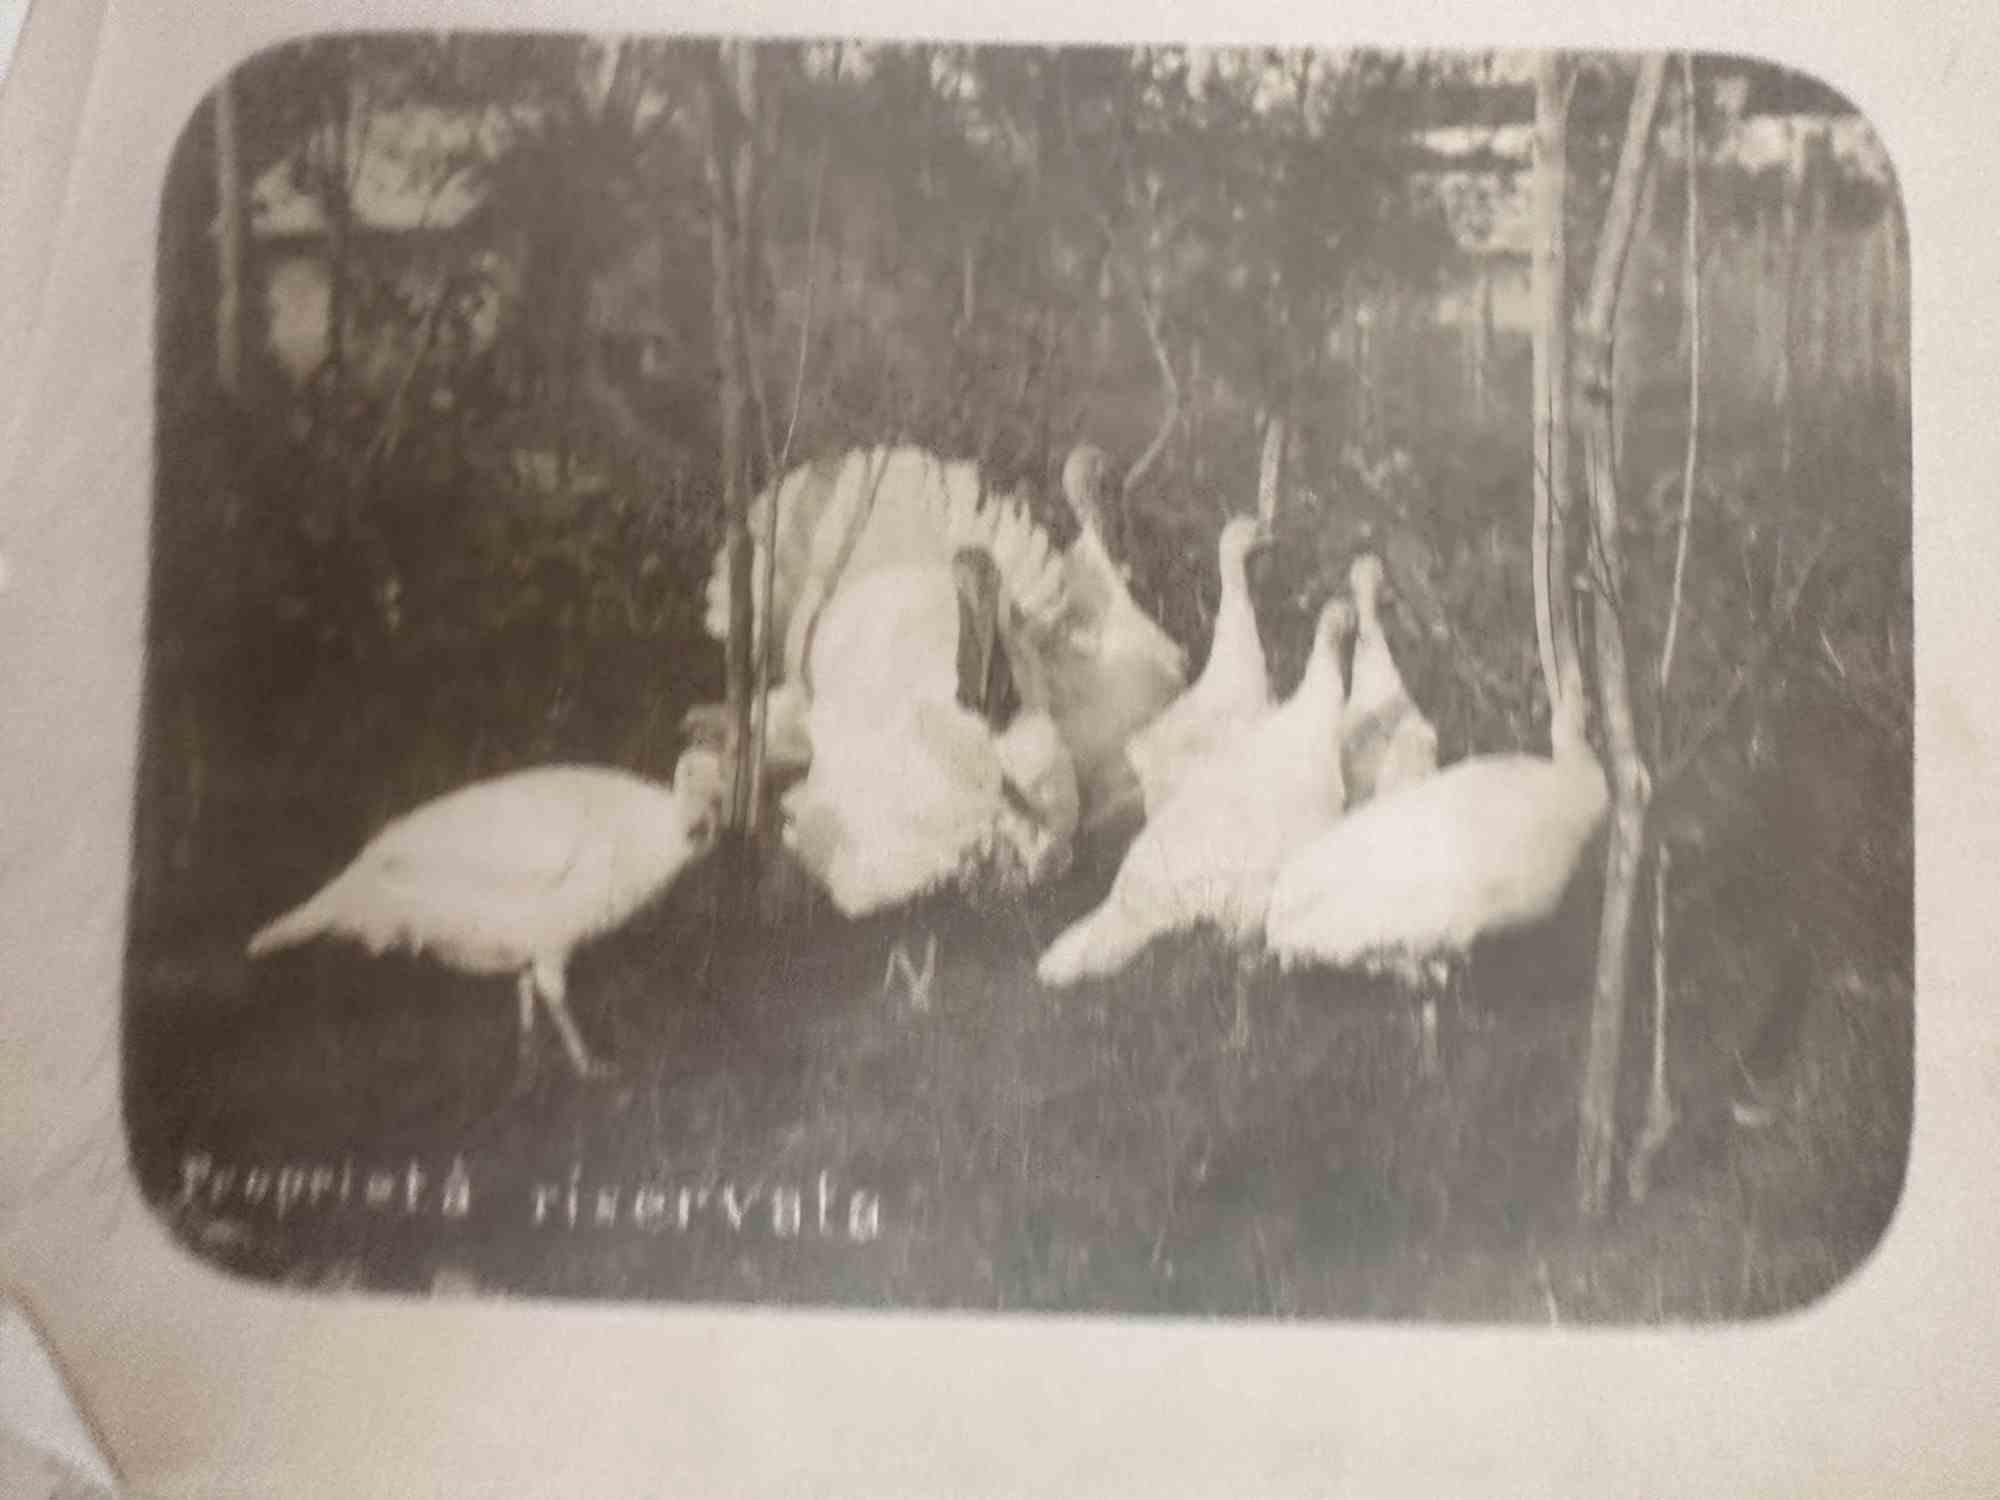 Unknown Figurative Photograph - Old Days  - Birds - Vintage Photo - Mid-20th Century